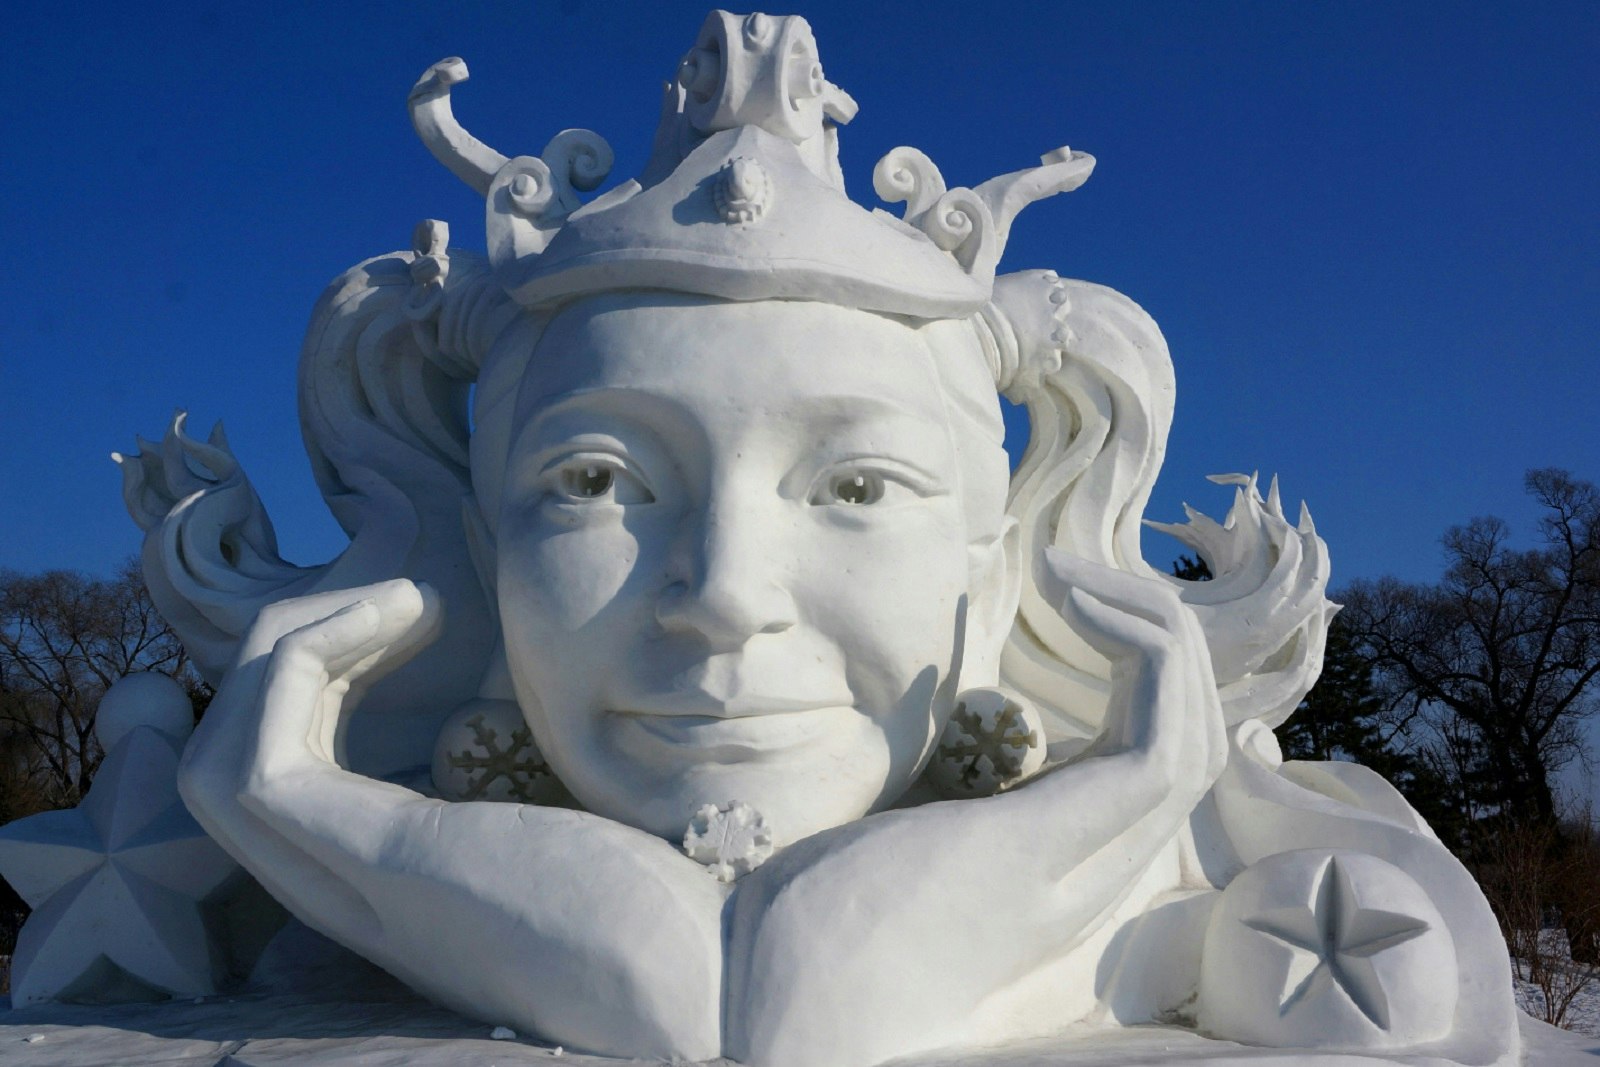 A snow sculpture, titled 'Pigtails', depicting a dreaming young woman's head. Towering nearly 20 feet tall, this sculpture was an entrant in Harbin's Snow Sculpture competition on Sun Island.